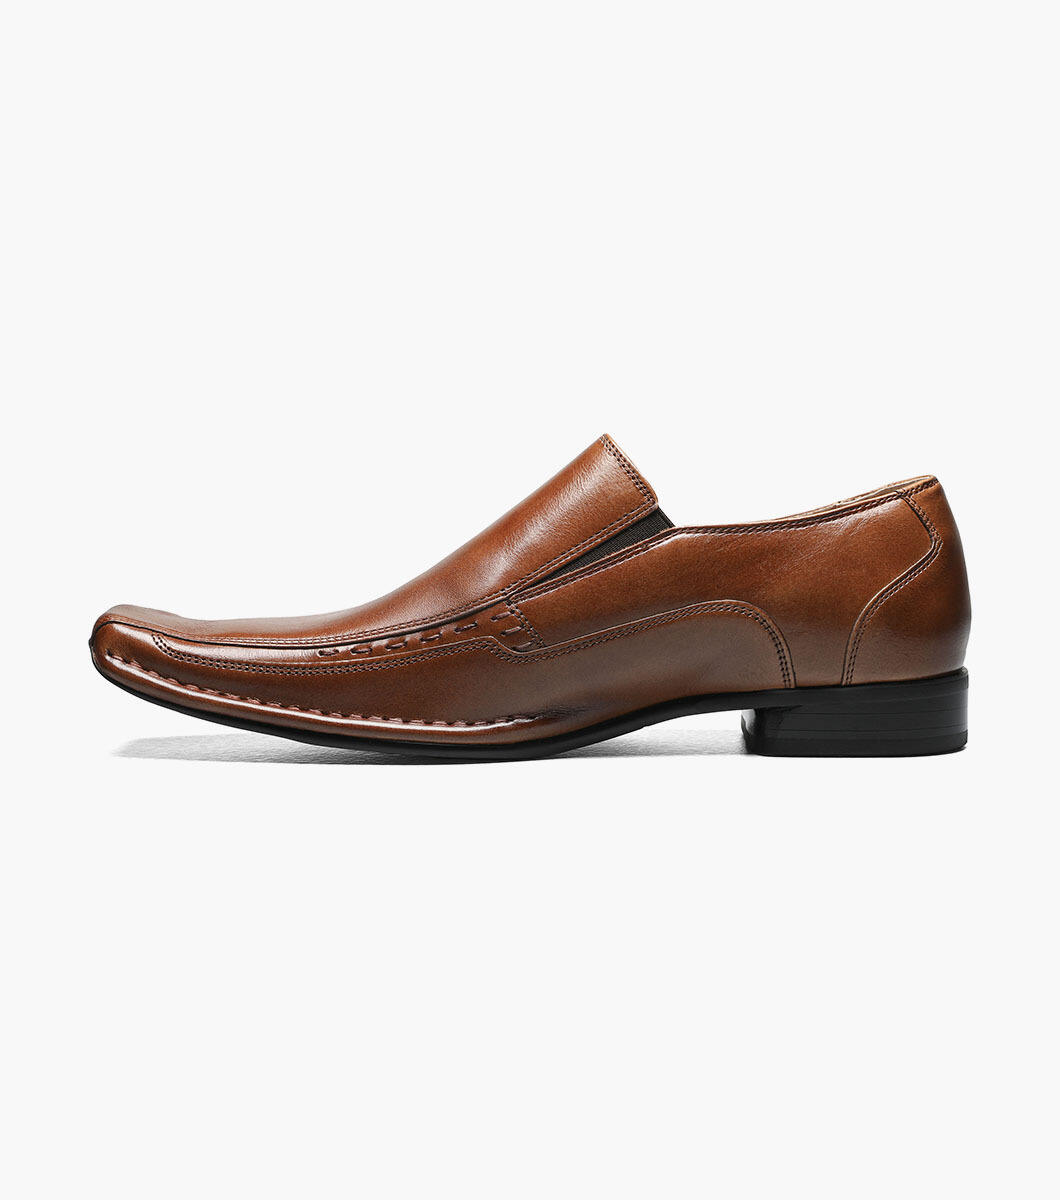 Details about   Stacy Adams Men's Templin Bicycle-Toe Slip-On 